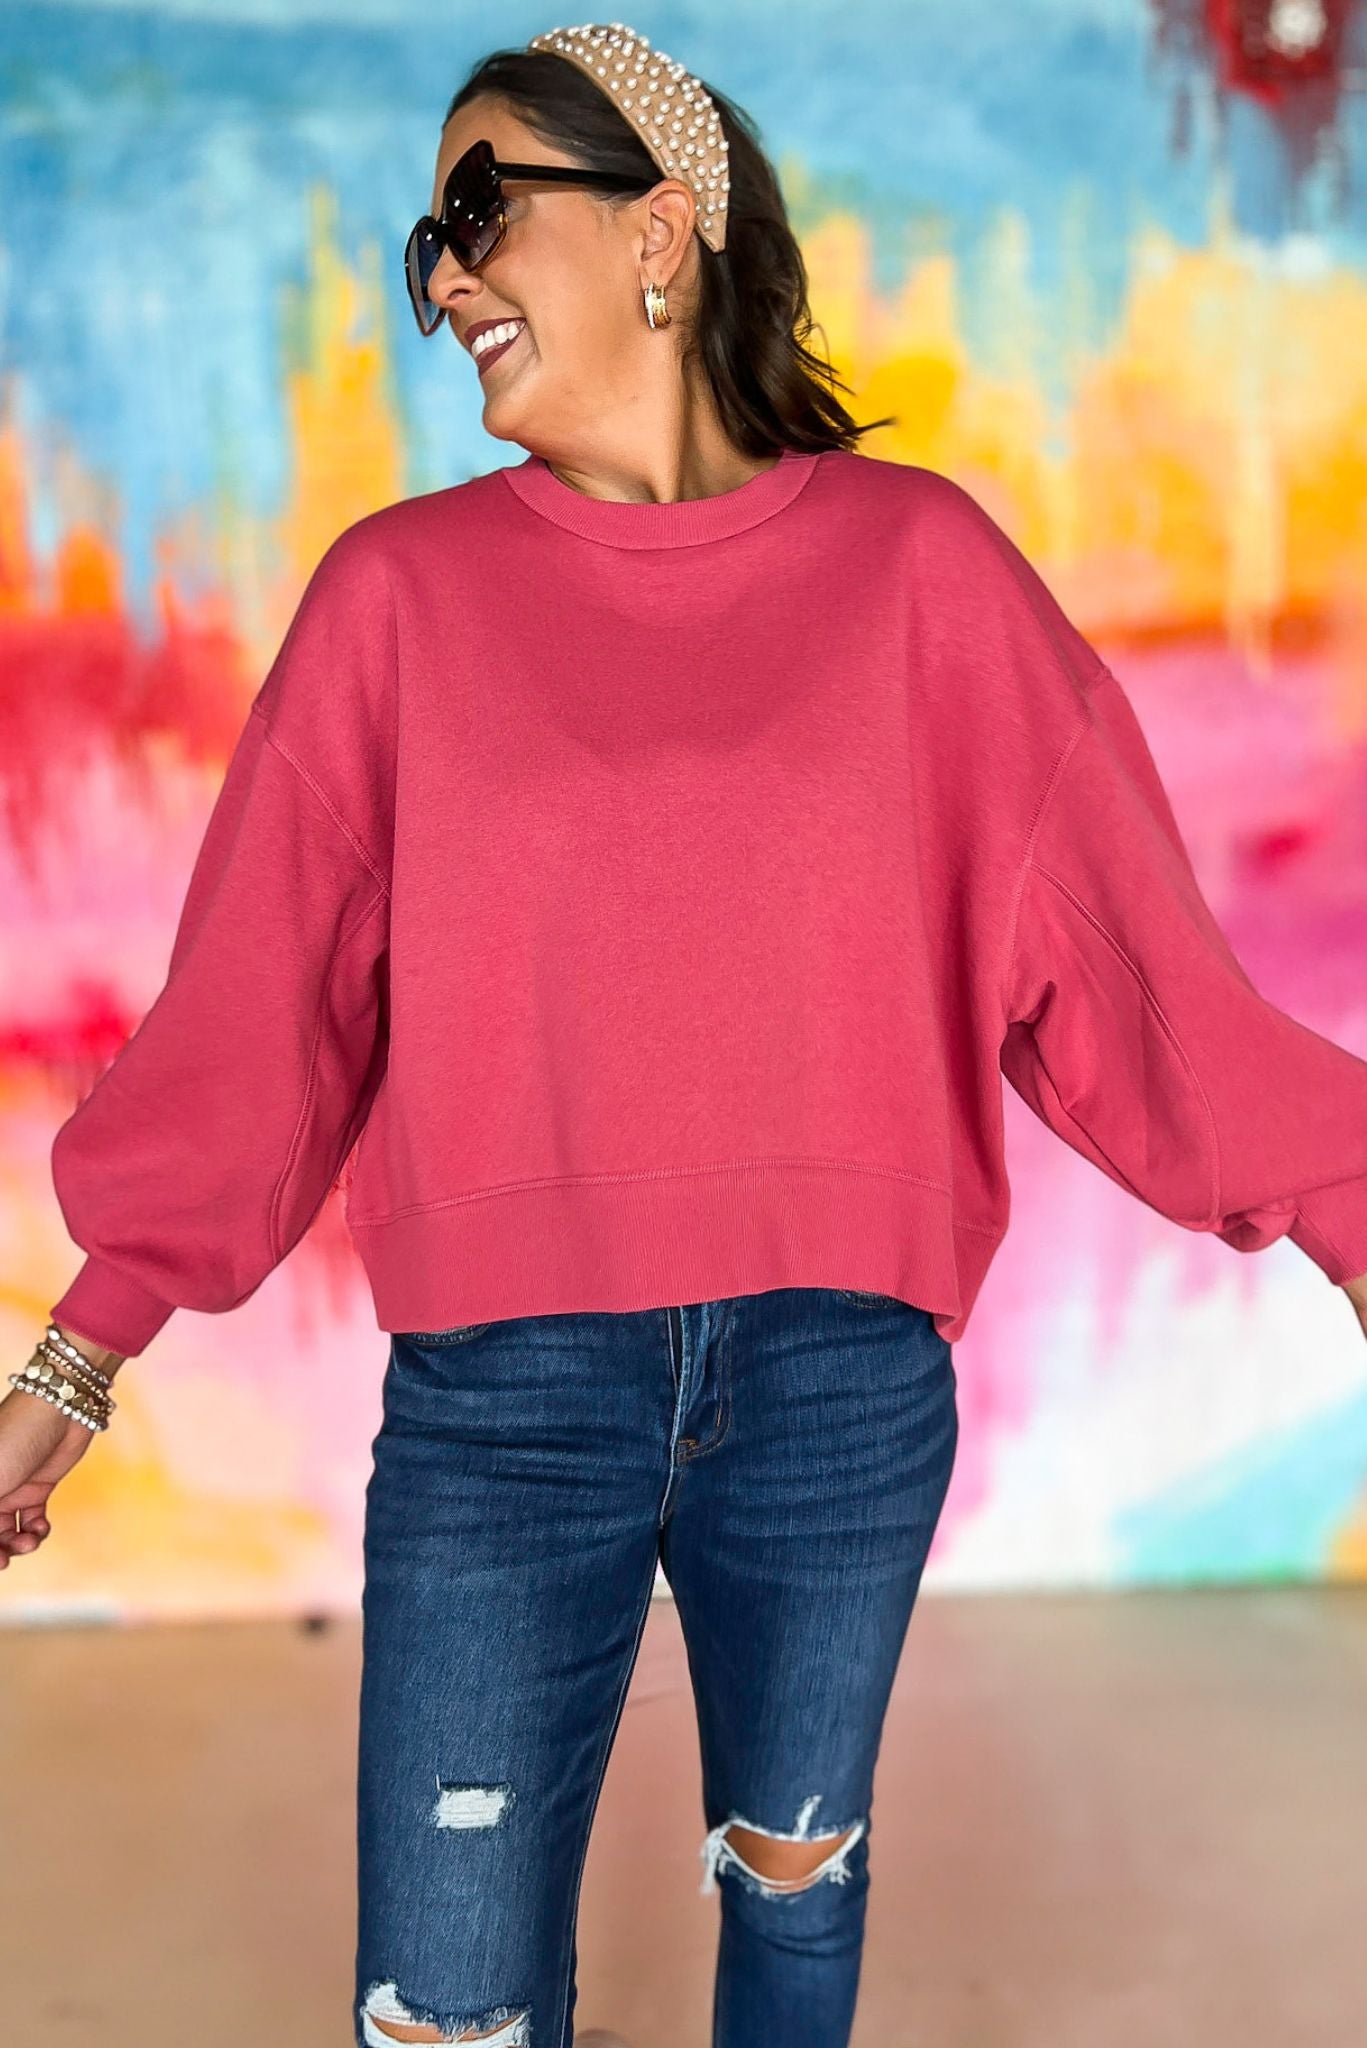  Pink Balloon Sleeve Sweatshirt, pink soft material, everyday wear, everyday sweatshirt, mom style, lounge to lunch, shop style your senses by mallory fitzsimmons